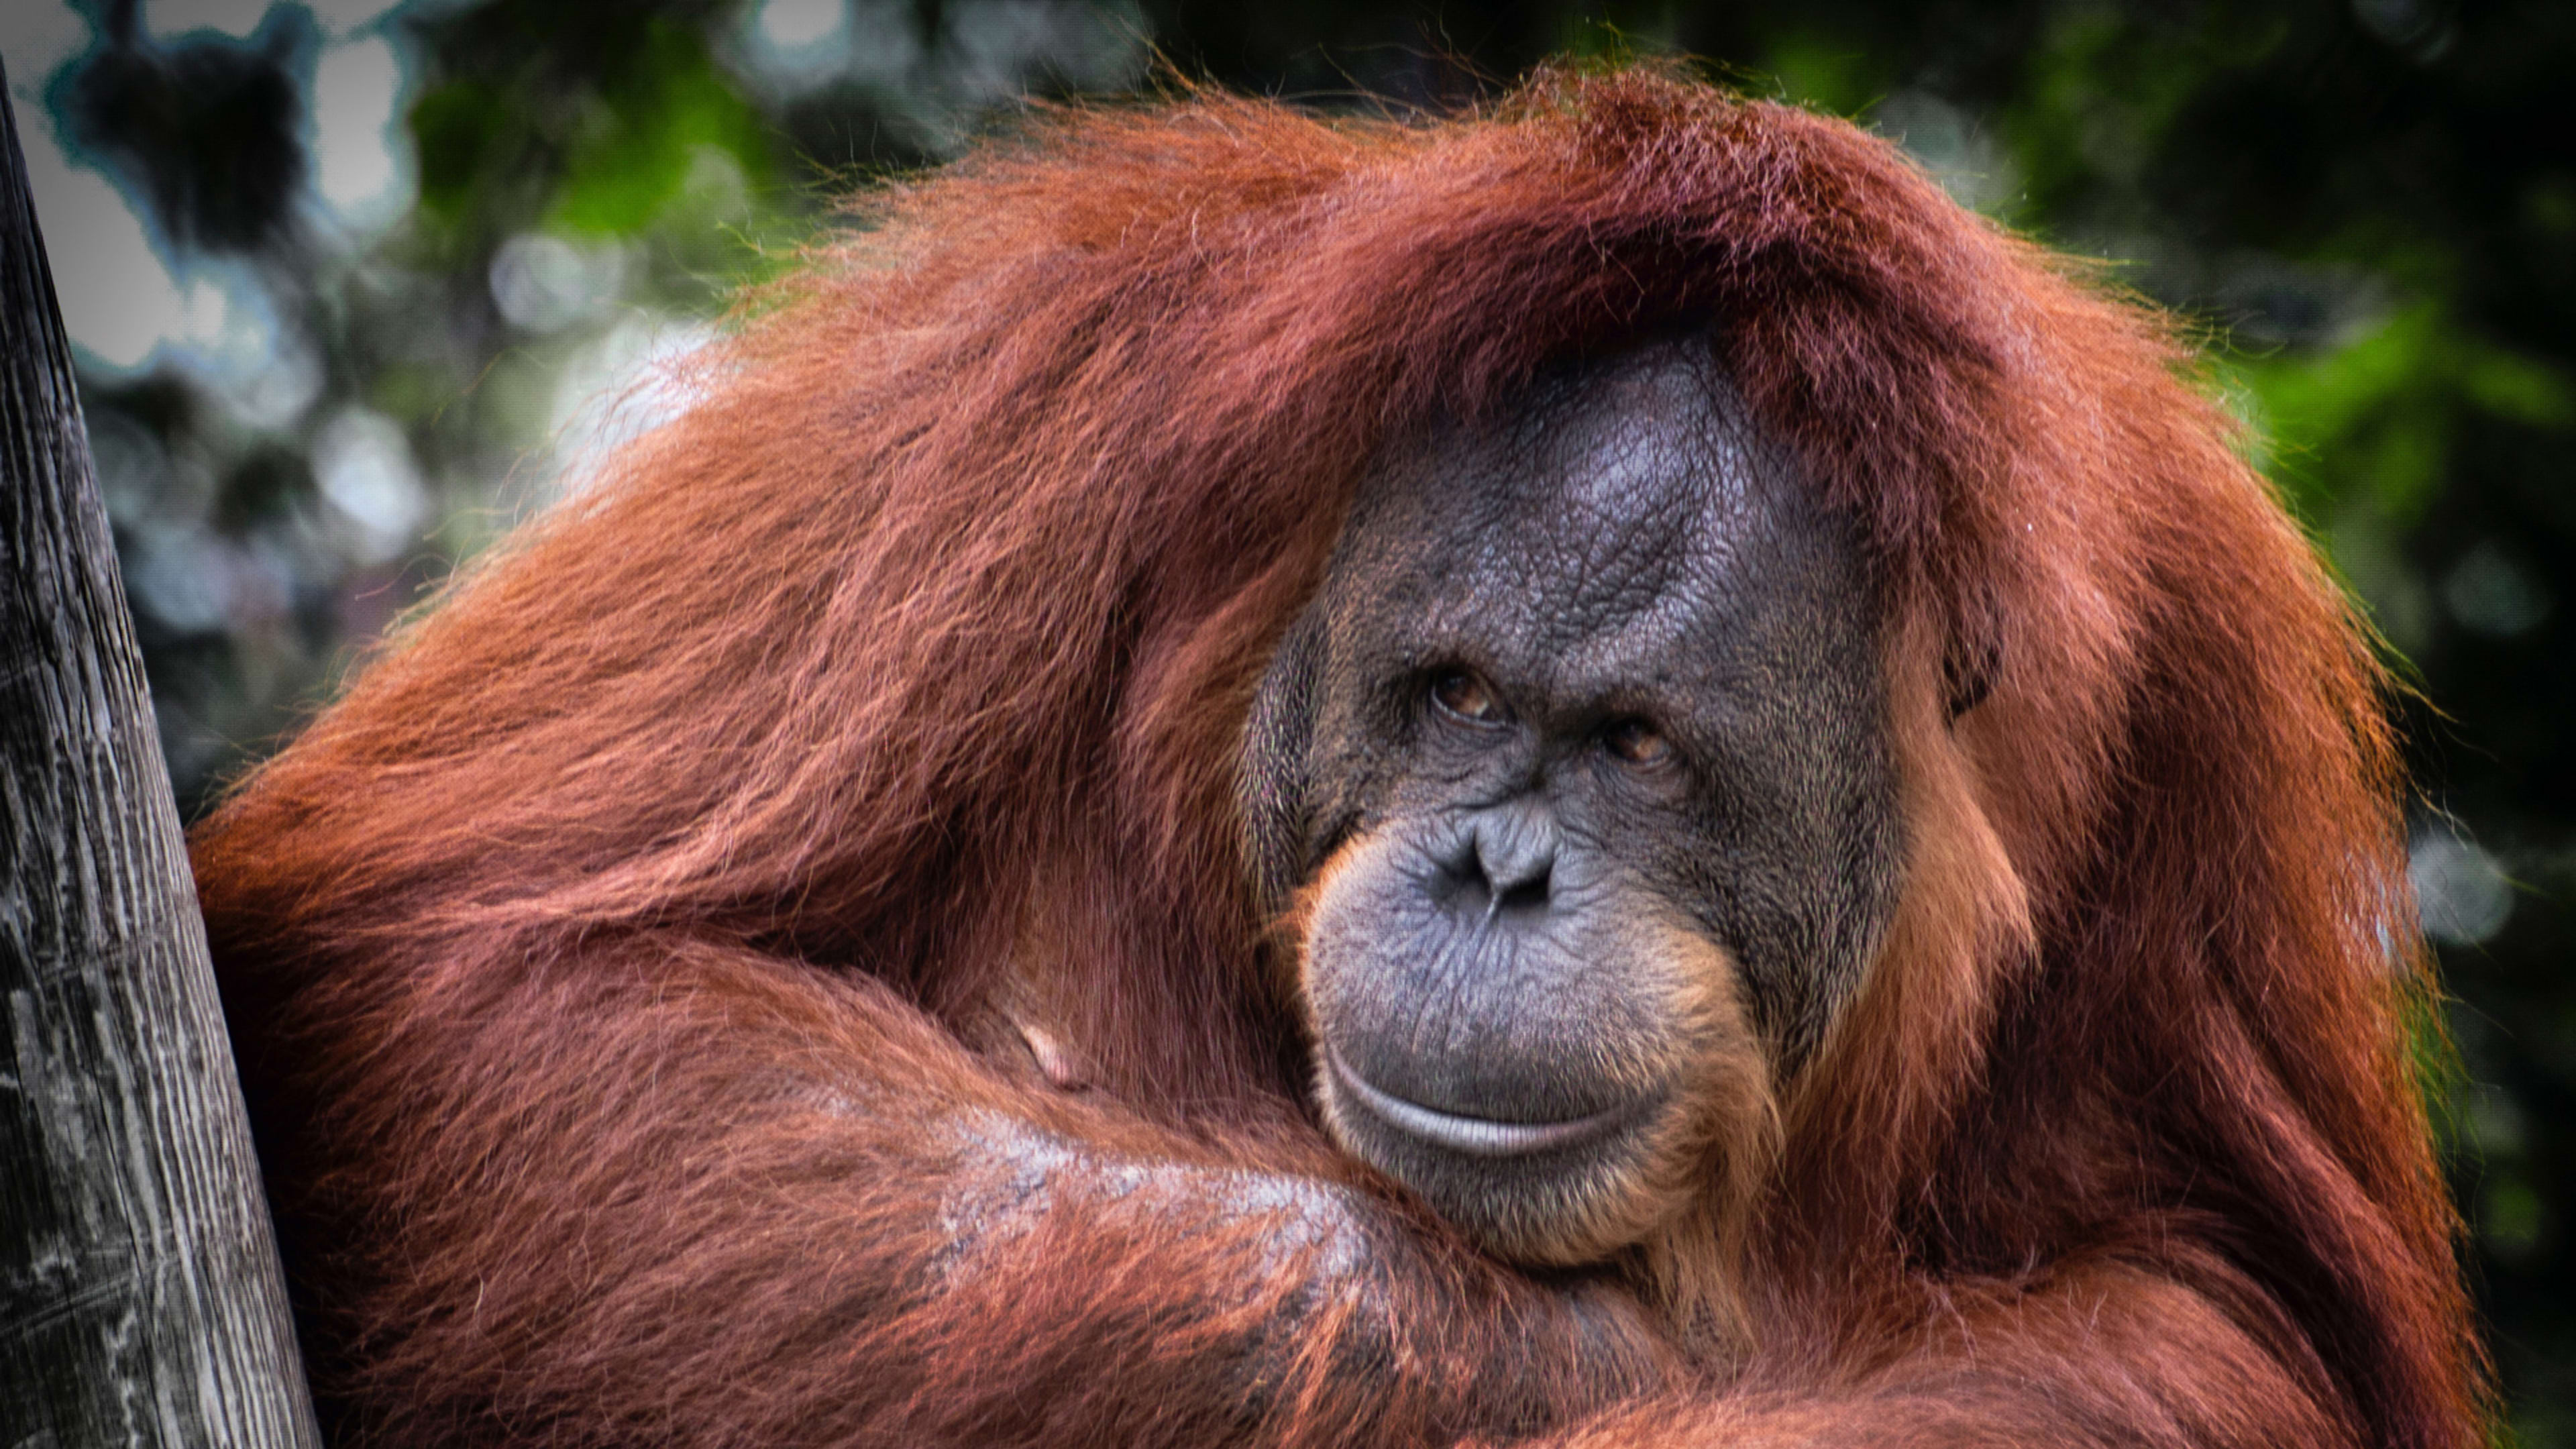 “It is heartbreaking”—Instagram responds to its illegal-ape-trade problem